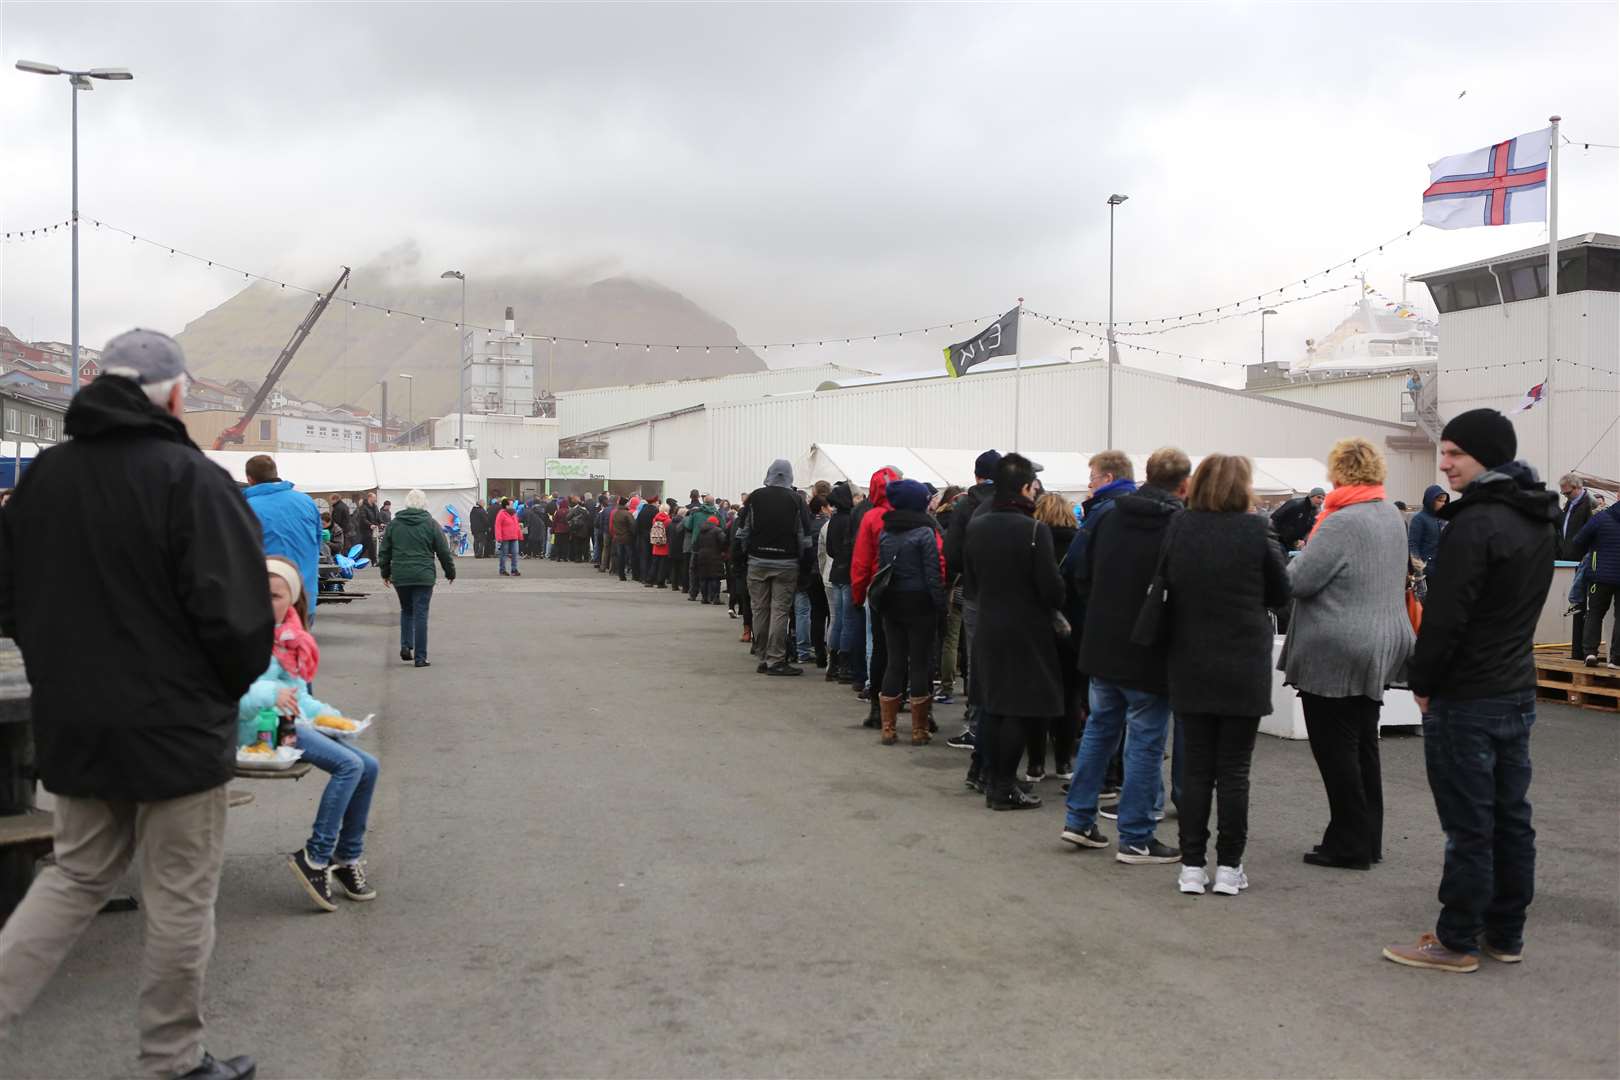 The team served an estimated 4,000 customers in the Faroe Islands